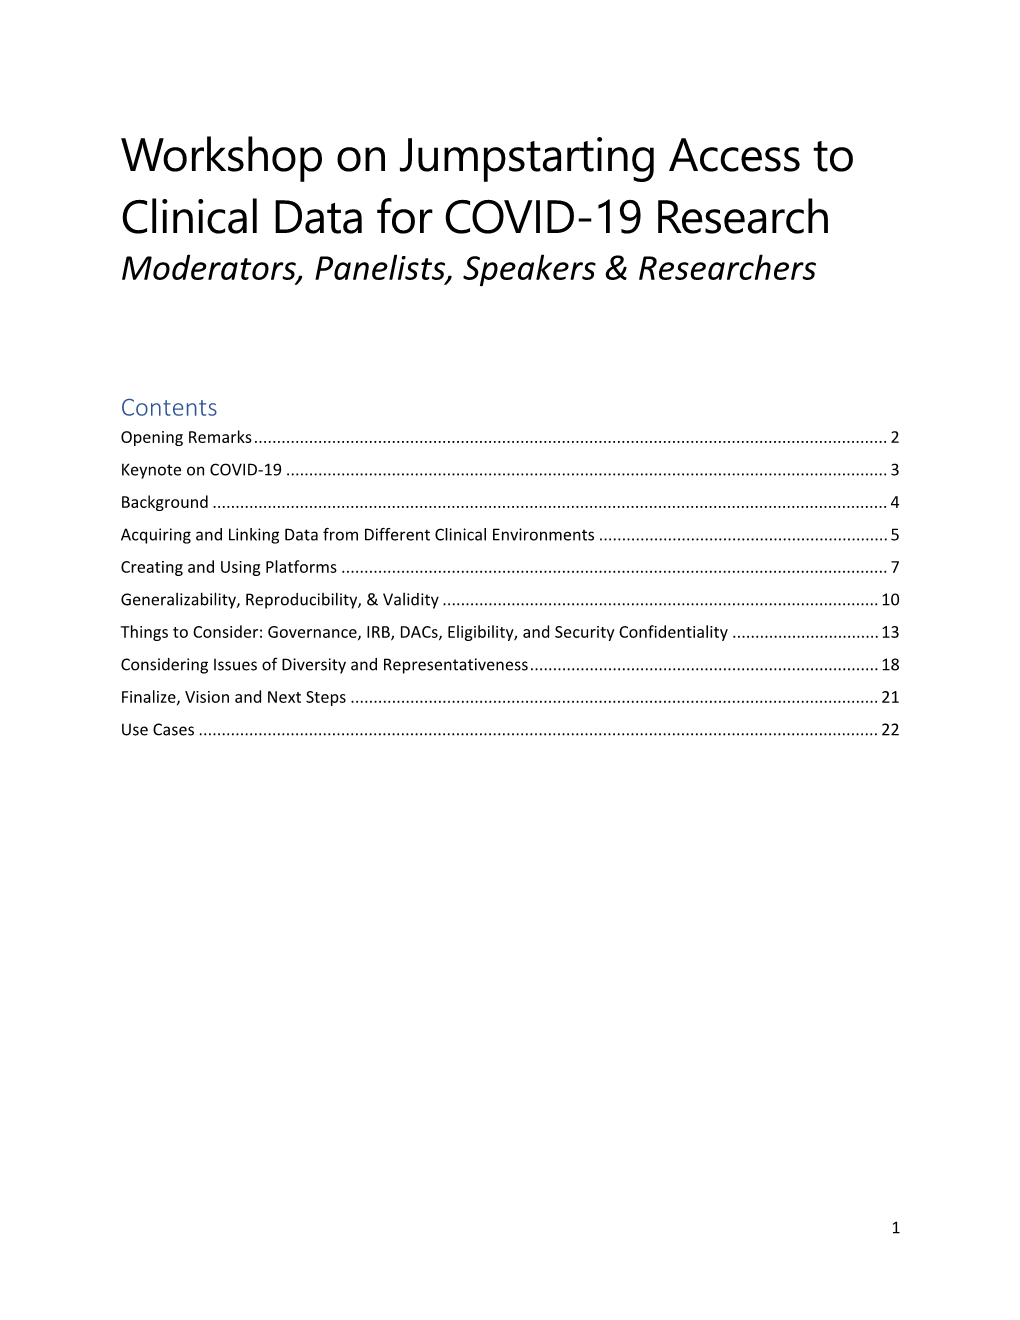 Workshop on Jumpstarting Access to Clinical Data for COVID-19 Research Moderators, Panelists, Speakers & Researchers